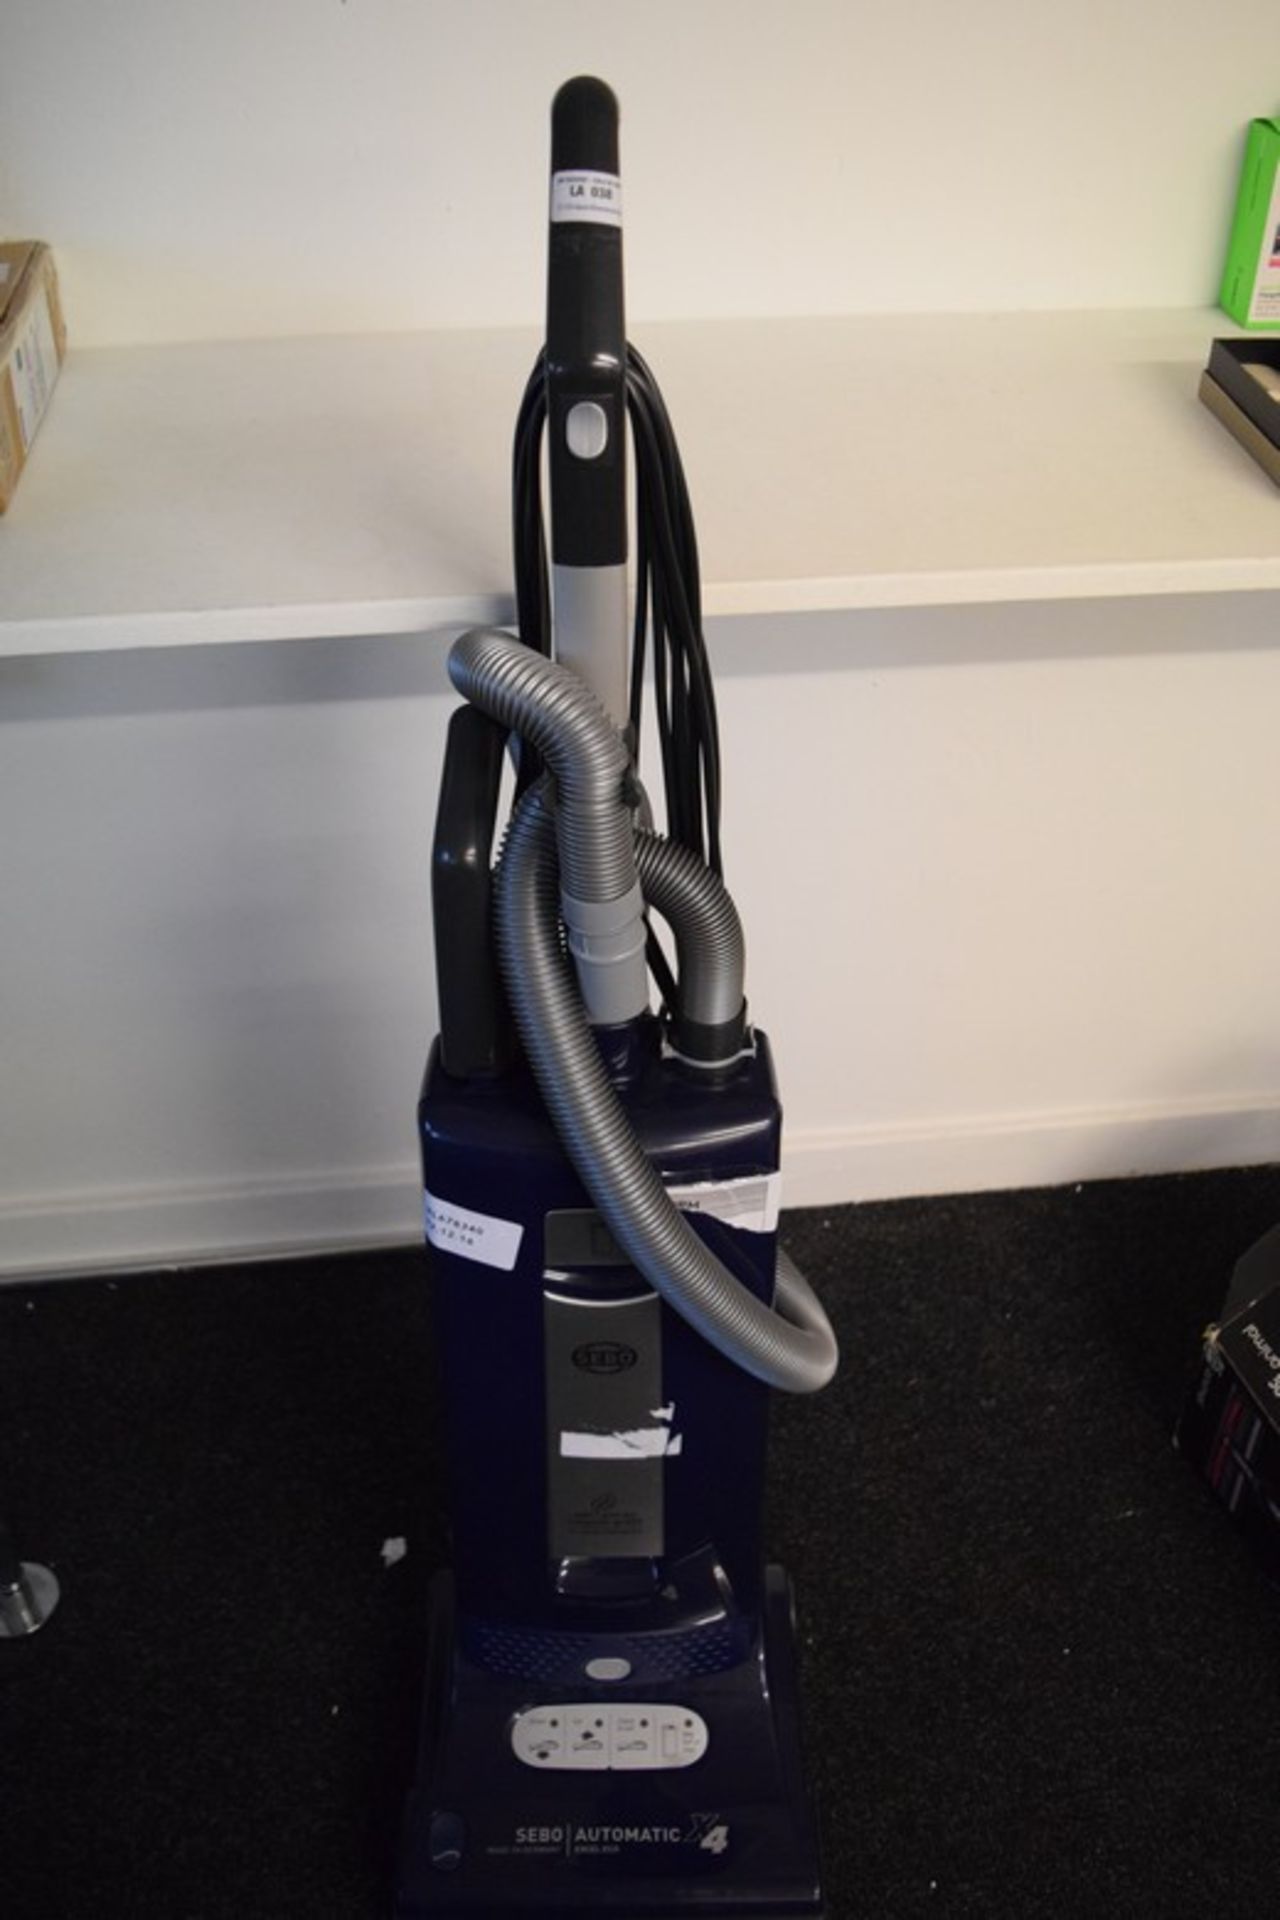 1 x SEBO X4 AUTOMATIC XO ECO UPRIGHT VACUUM CLEANER RRP £280 (22.12.2016) *PLEASE NOTE THAT THE